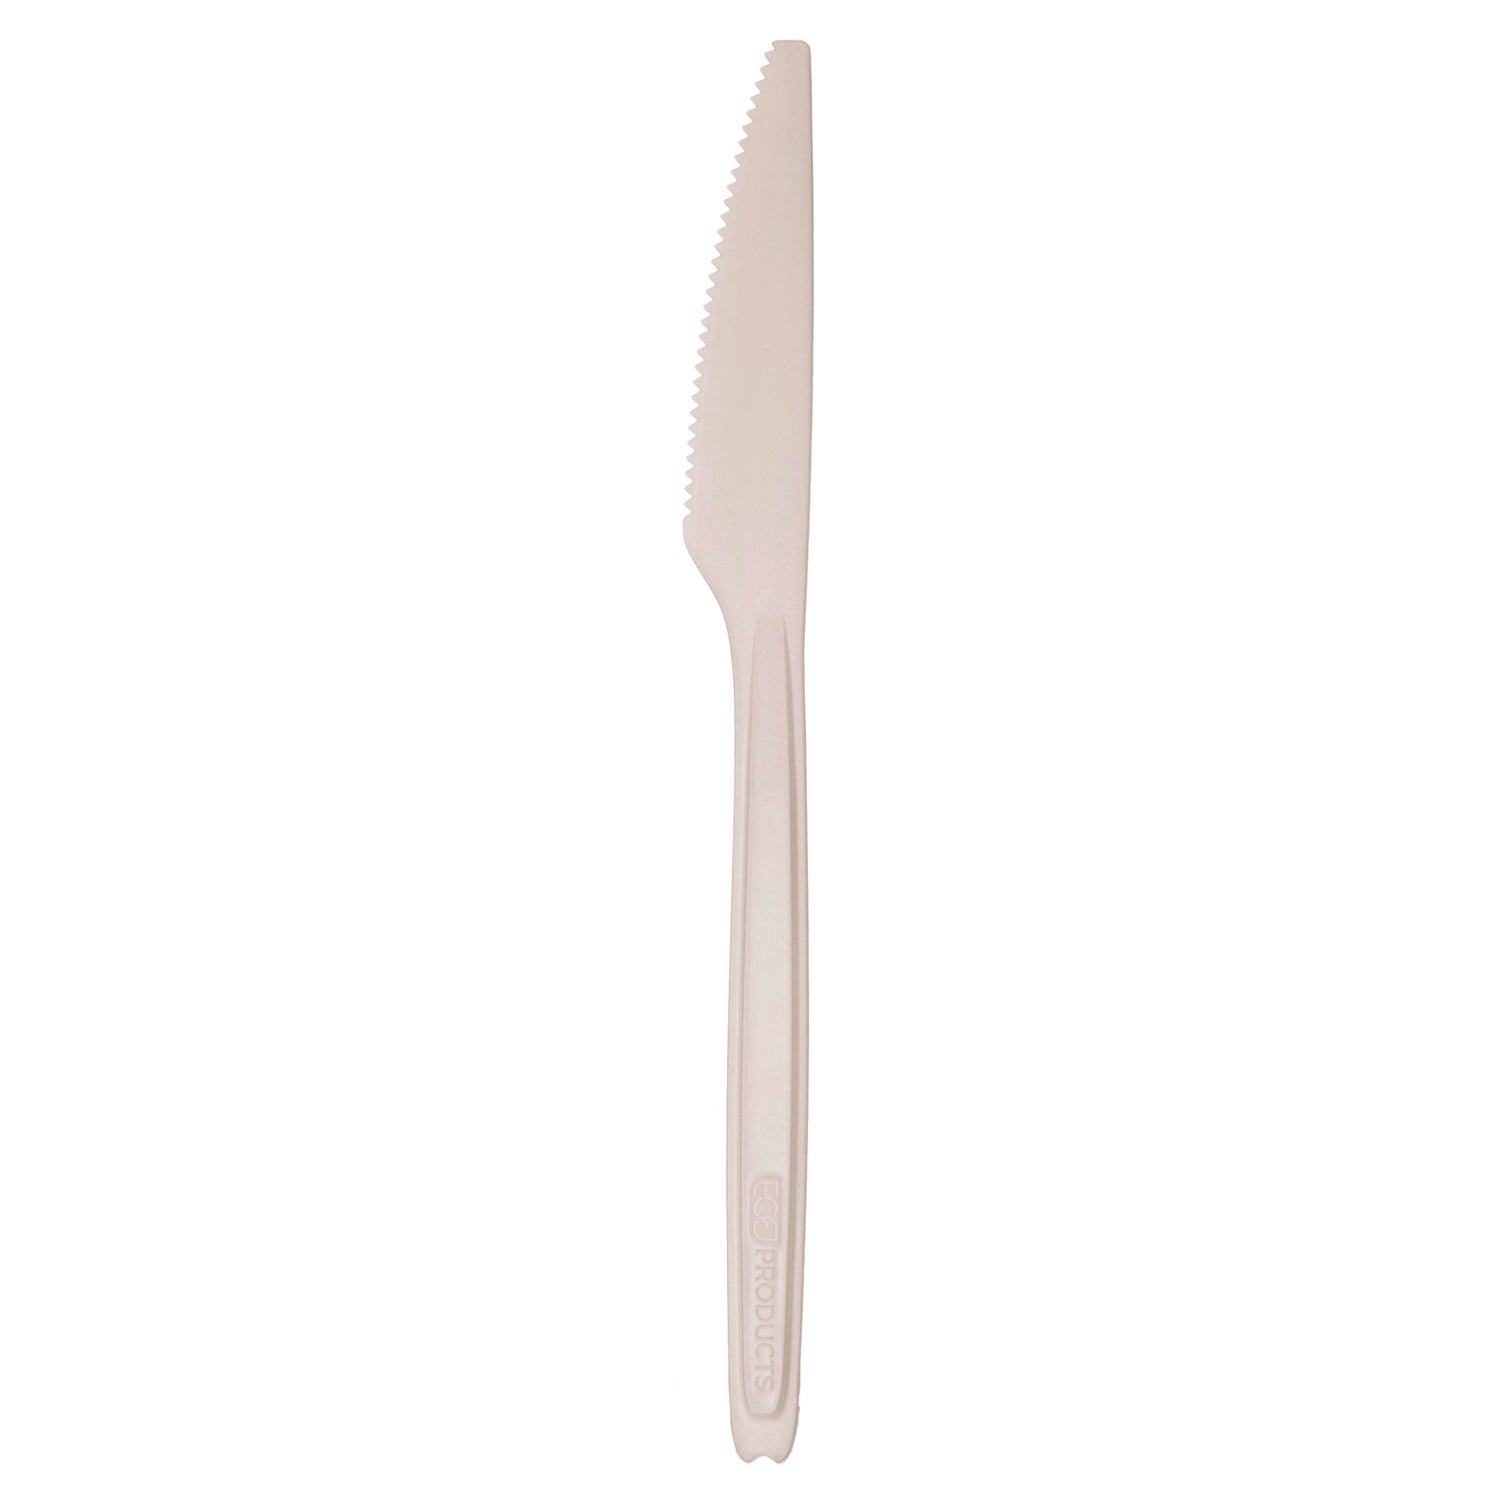 cutlery-for-cutlerease-dispensing-system-knife-6-white-960-carton_ecoepce6knwht - 1